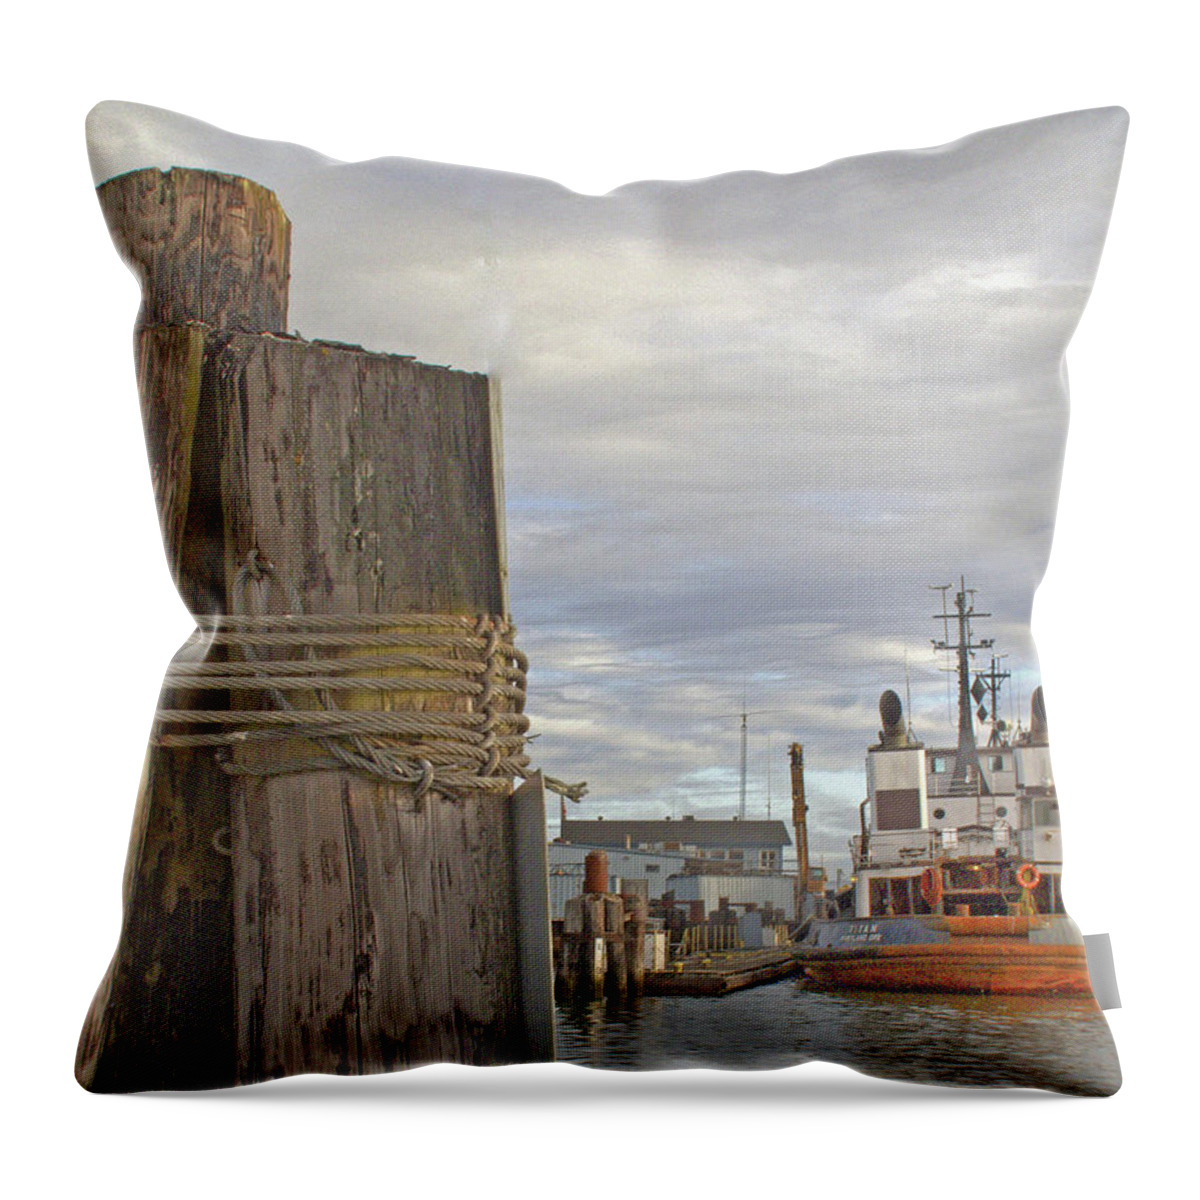 Boat Throw Pillow featuring the photograph View from the Pilings by Suzy Piatt